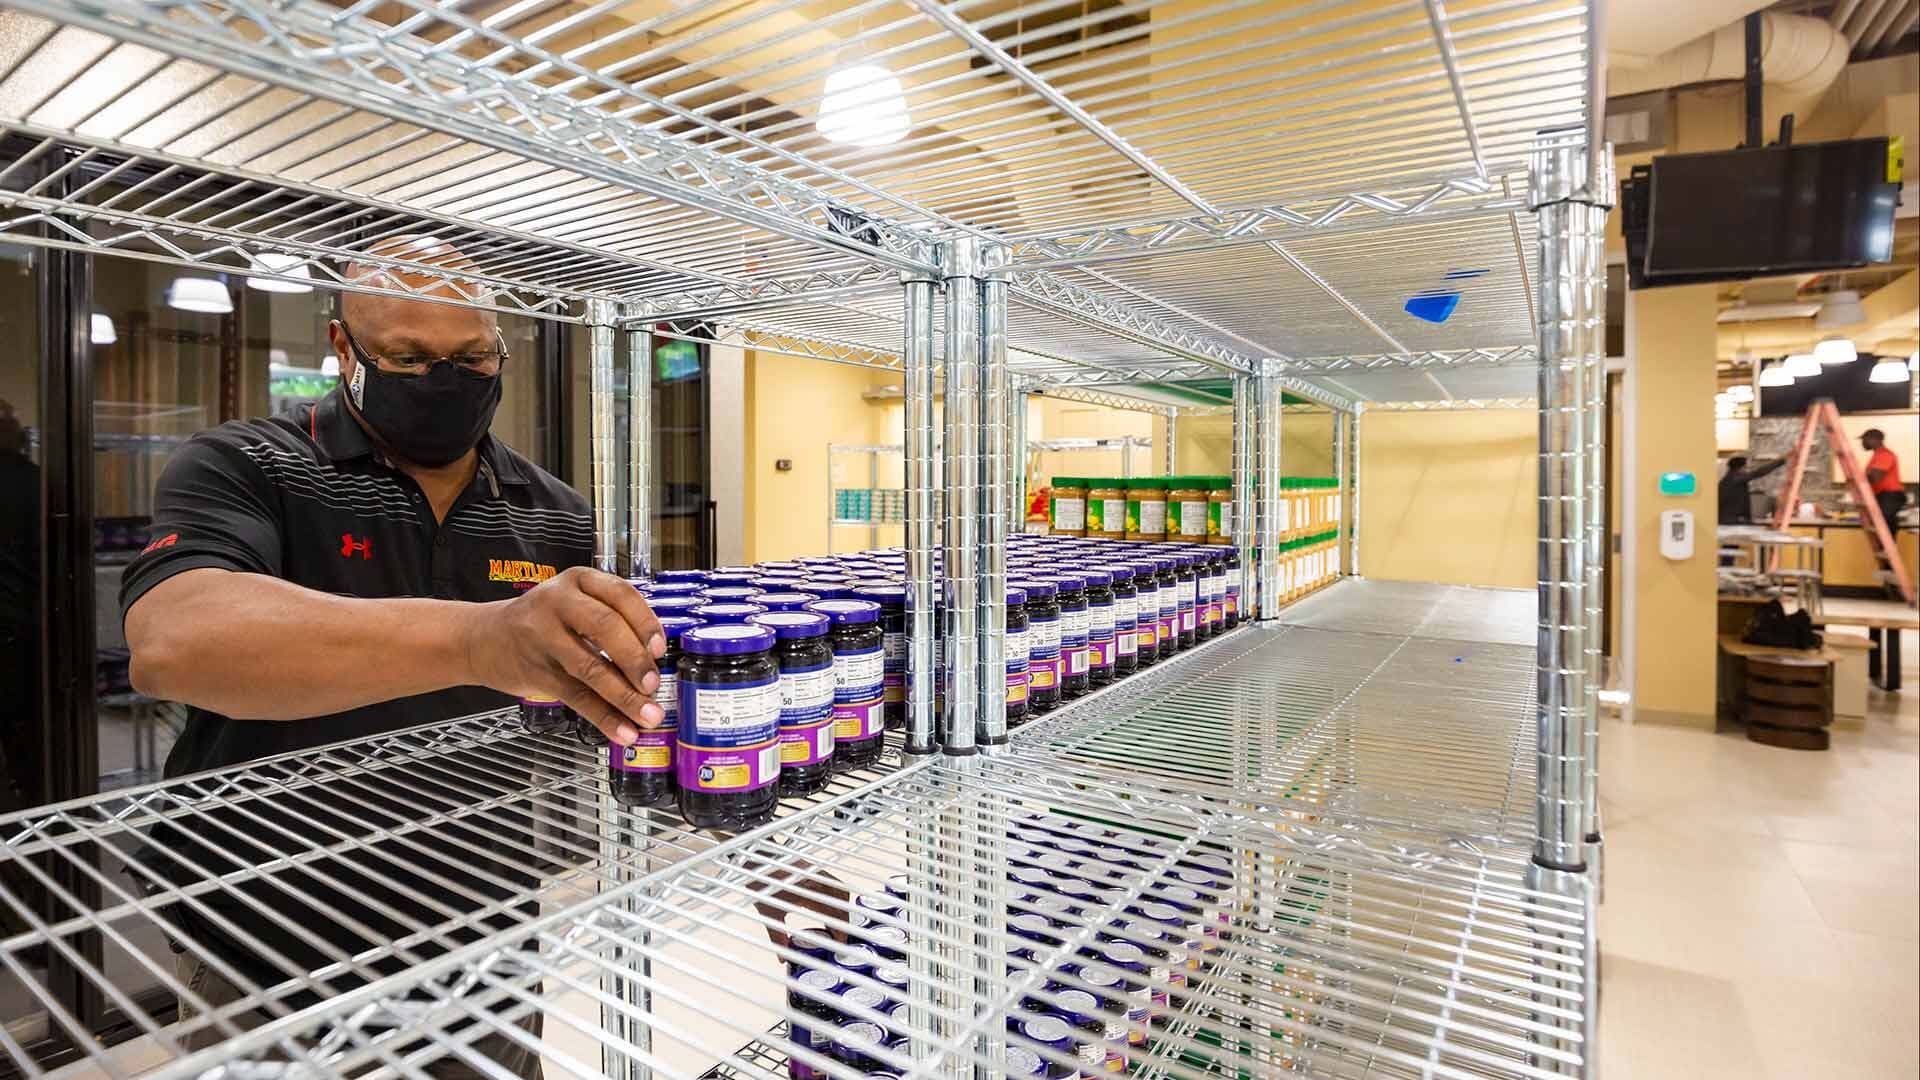 Employee stocks shelves in the Campus Pantry